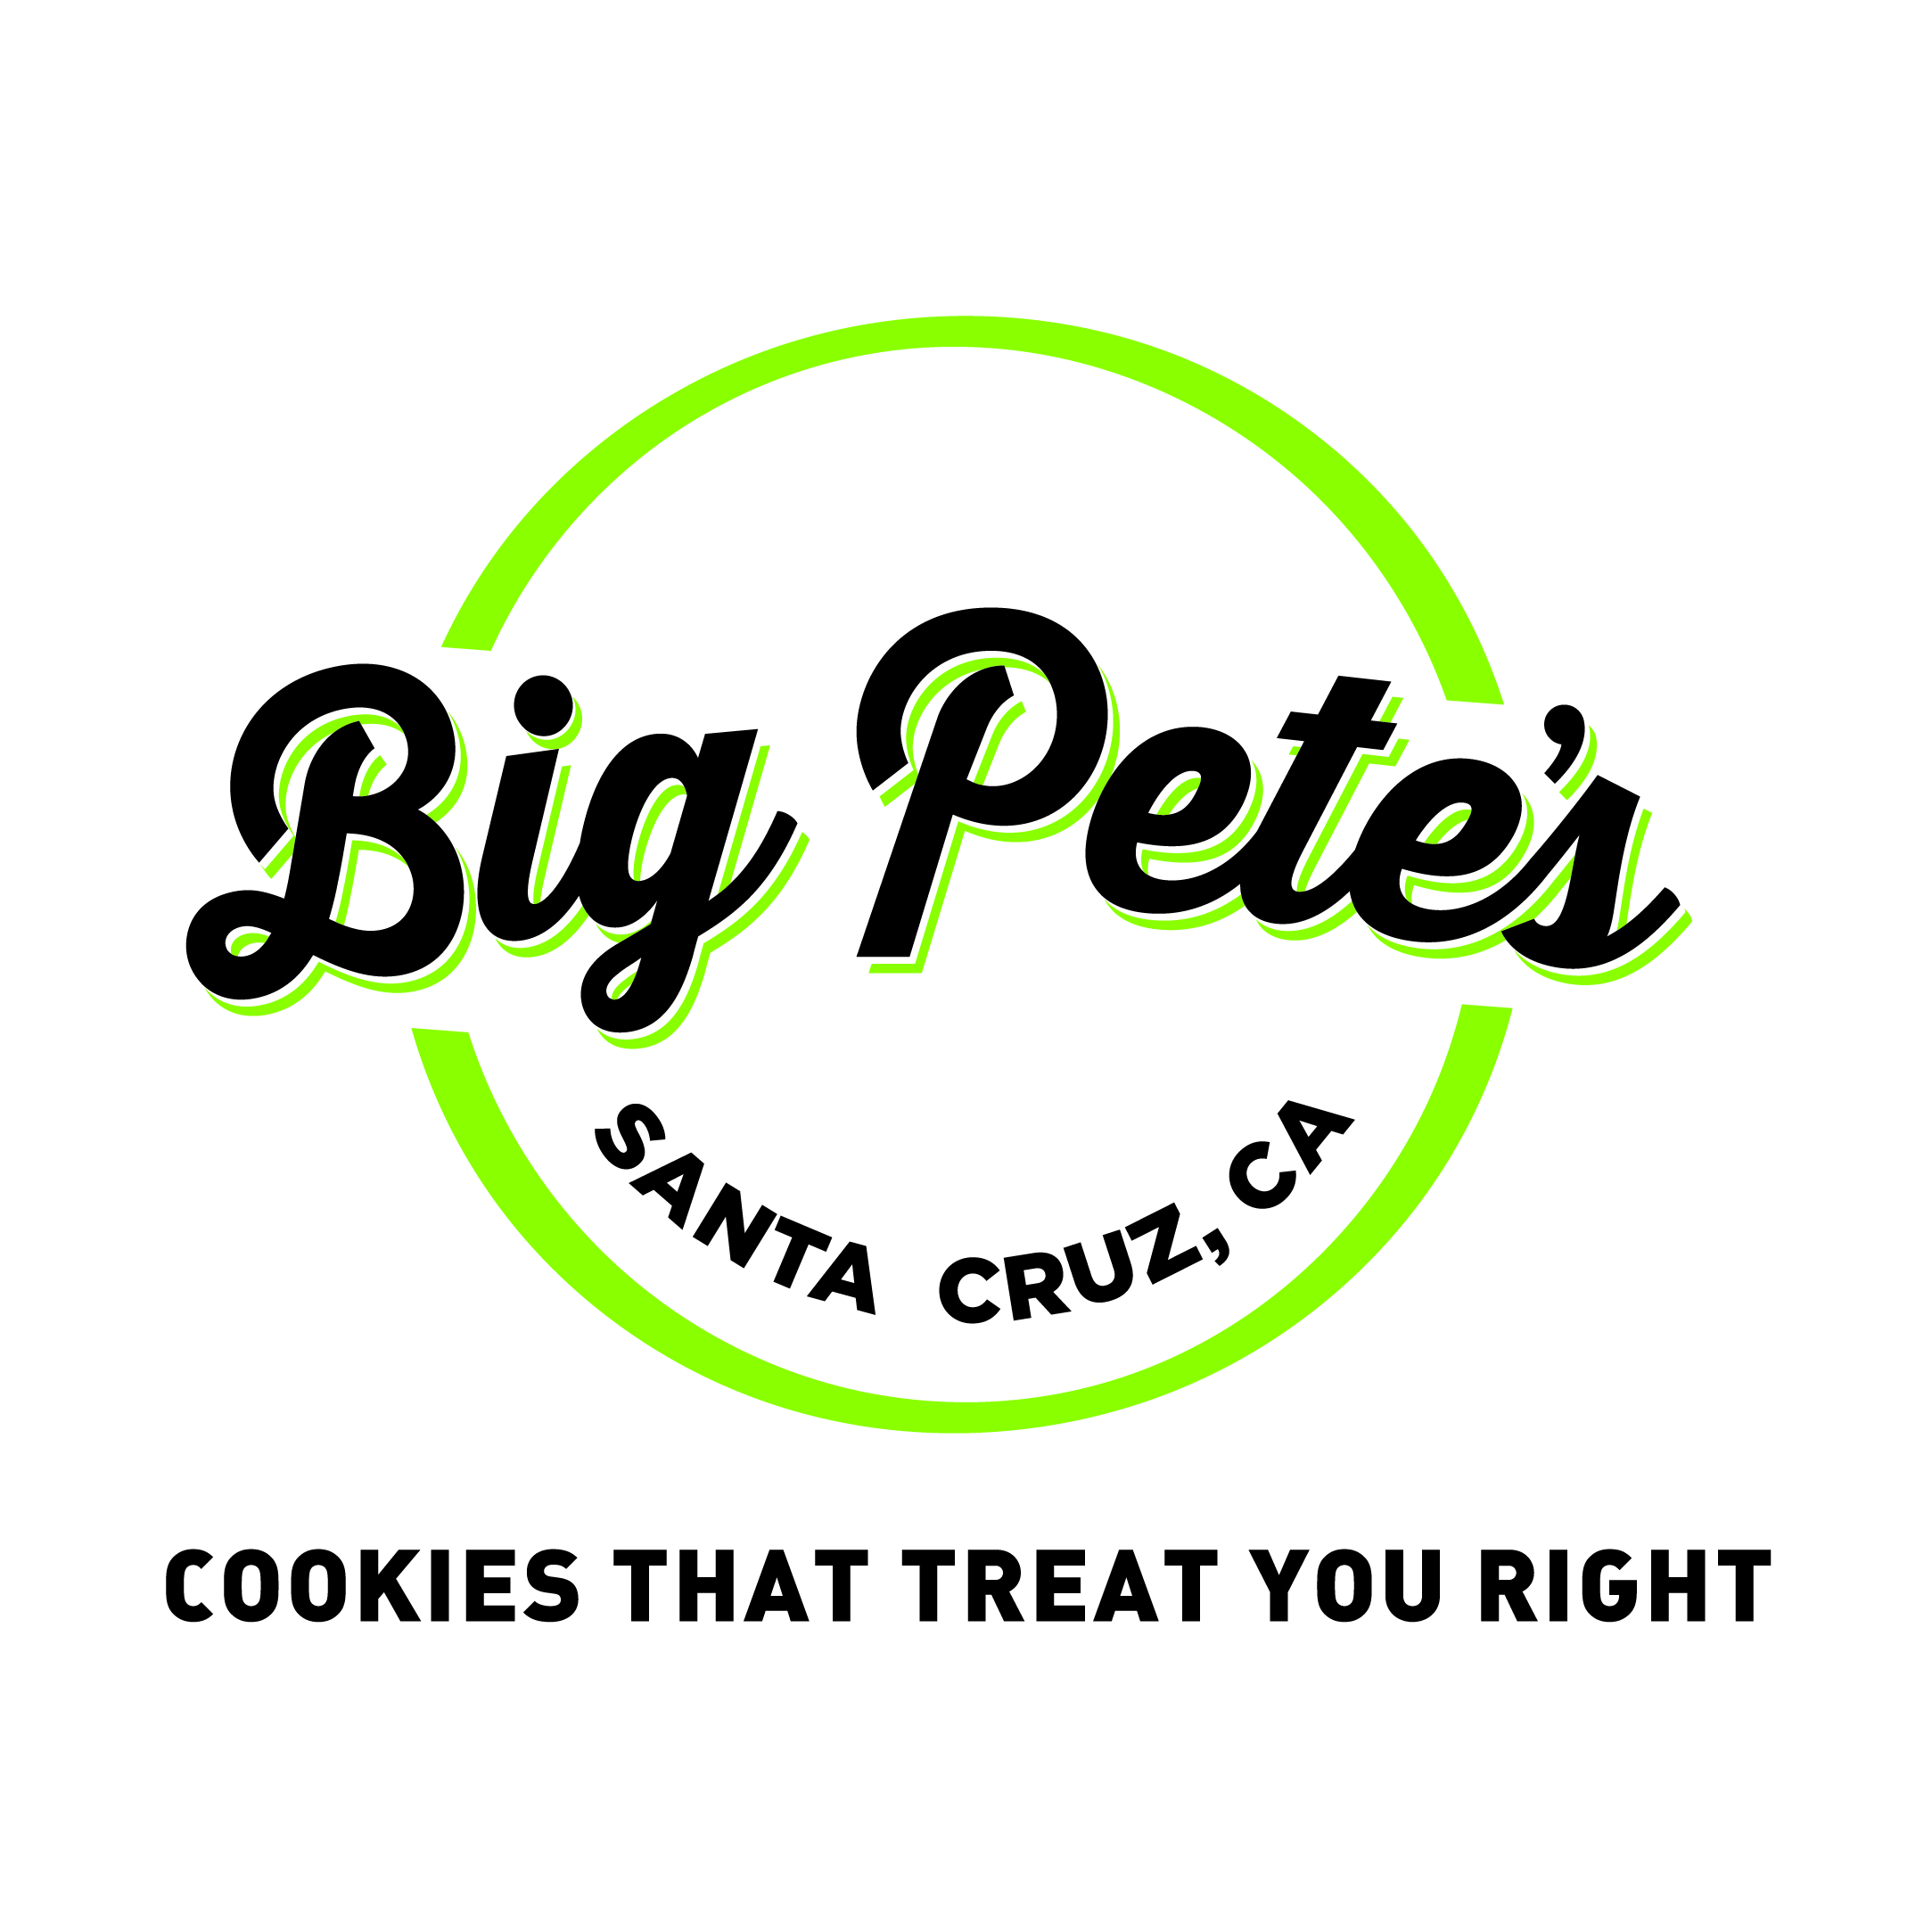 The logo of Big Pete's